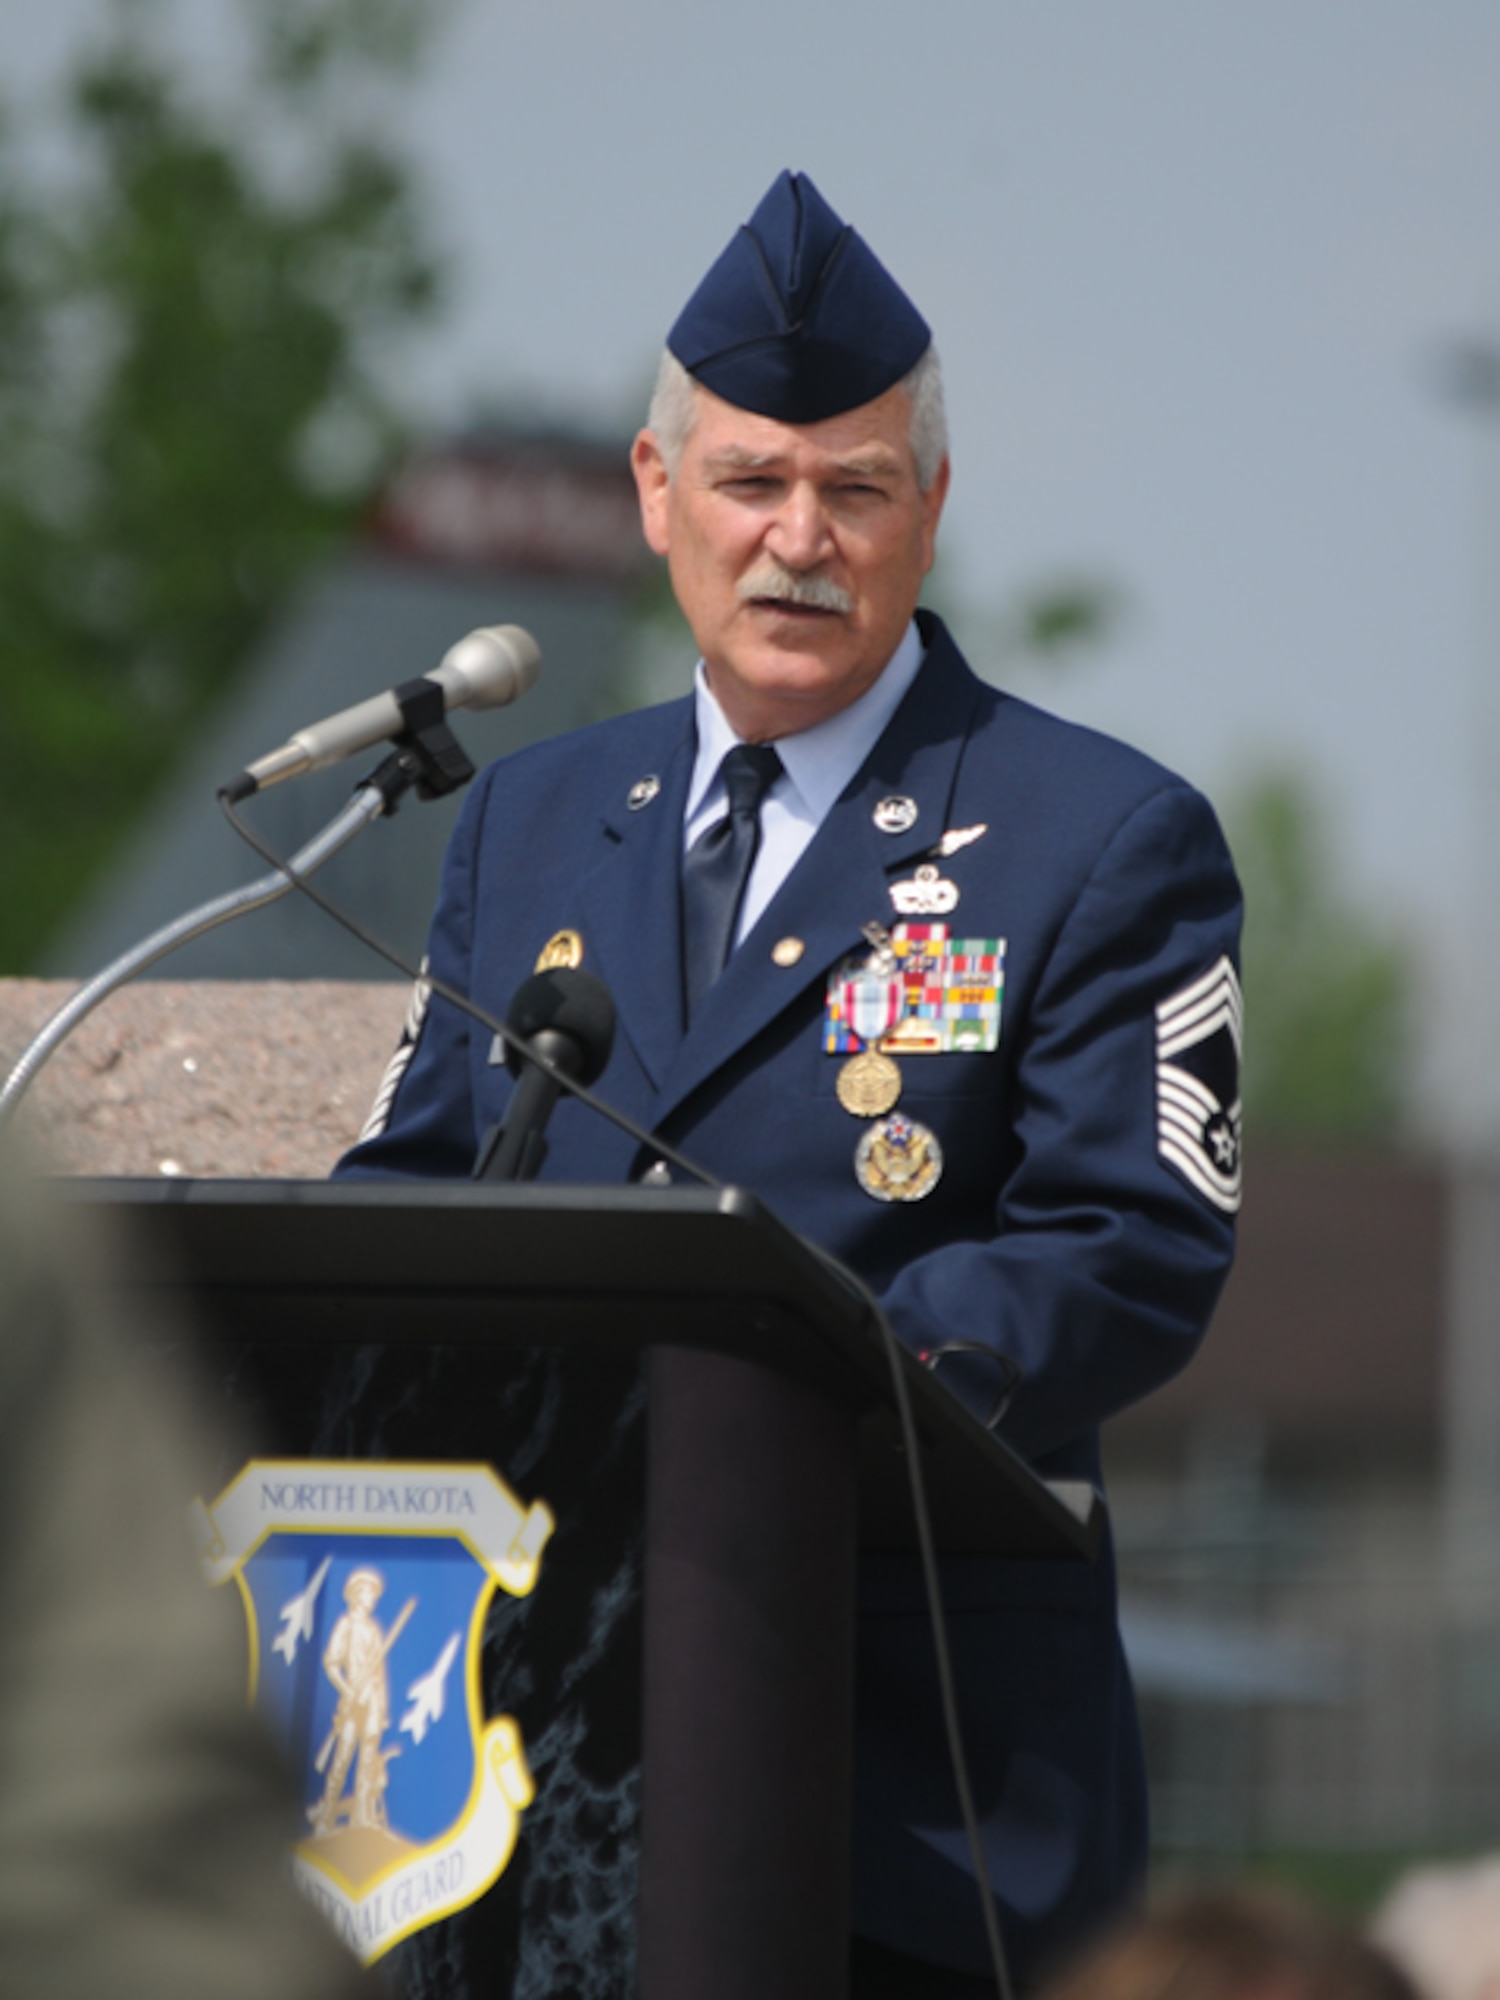 Chief Master Sgt. James Clemenson speaks June 4, during his retirement ceremony at the North Dakota Air National Guard, Fargo, N.D. Clemenson is the 
last enlisted Airman to have been stationed in Vietnam to retire from the Air 
Force.  Clemenson did two tours in Vietnam with the U.S. Army from October 1970 through April 1972. He joined the North Dakota Air National Guard in 1973 and has most recently served as the National Guard Bureau senior enlisted manager for the joint staff, Washington, D.C. He has served in the United States military for 41 years. Only one other active Airman, Chief Master Sgt. Jim Honeycutt, still remains in service that wears a Vietnam Service Ribbon, although it's for temporary duty in country versus a mobilization. Clemenson and Honeycutt's status is among active-duty Airmen and does not include drill status Guardsmen, on which no clear statistics were available.